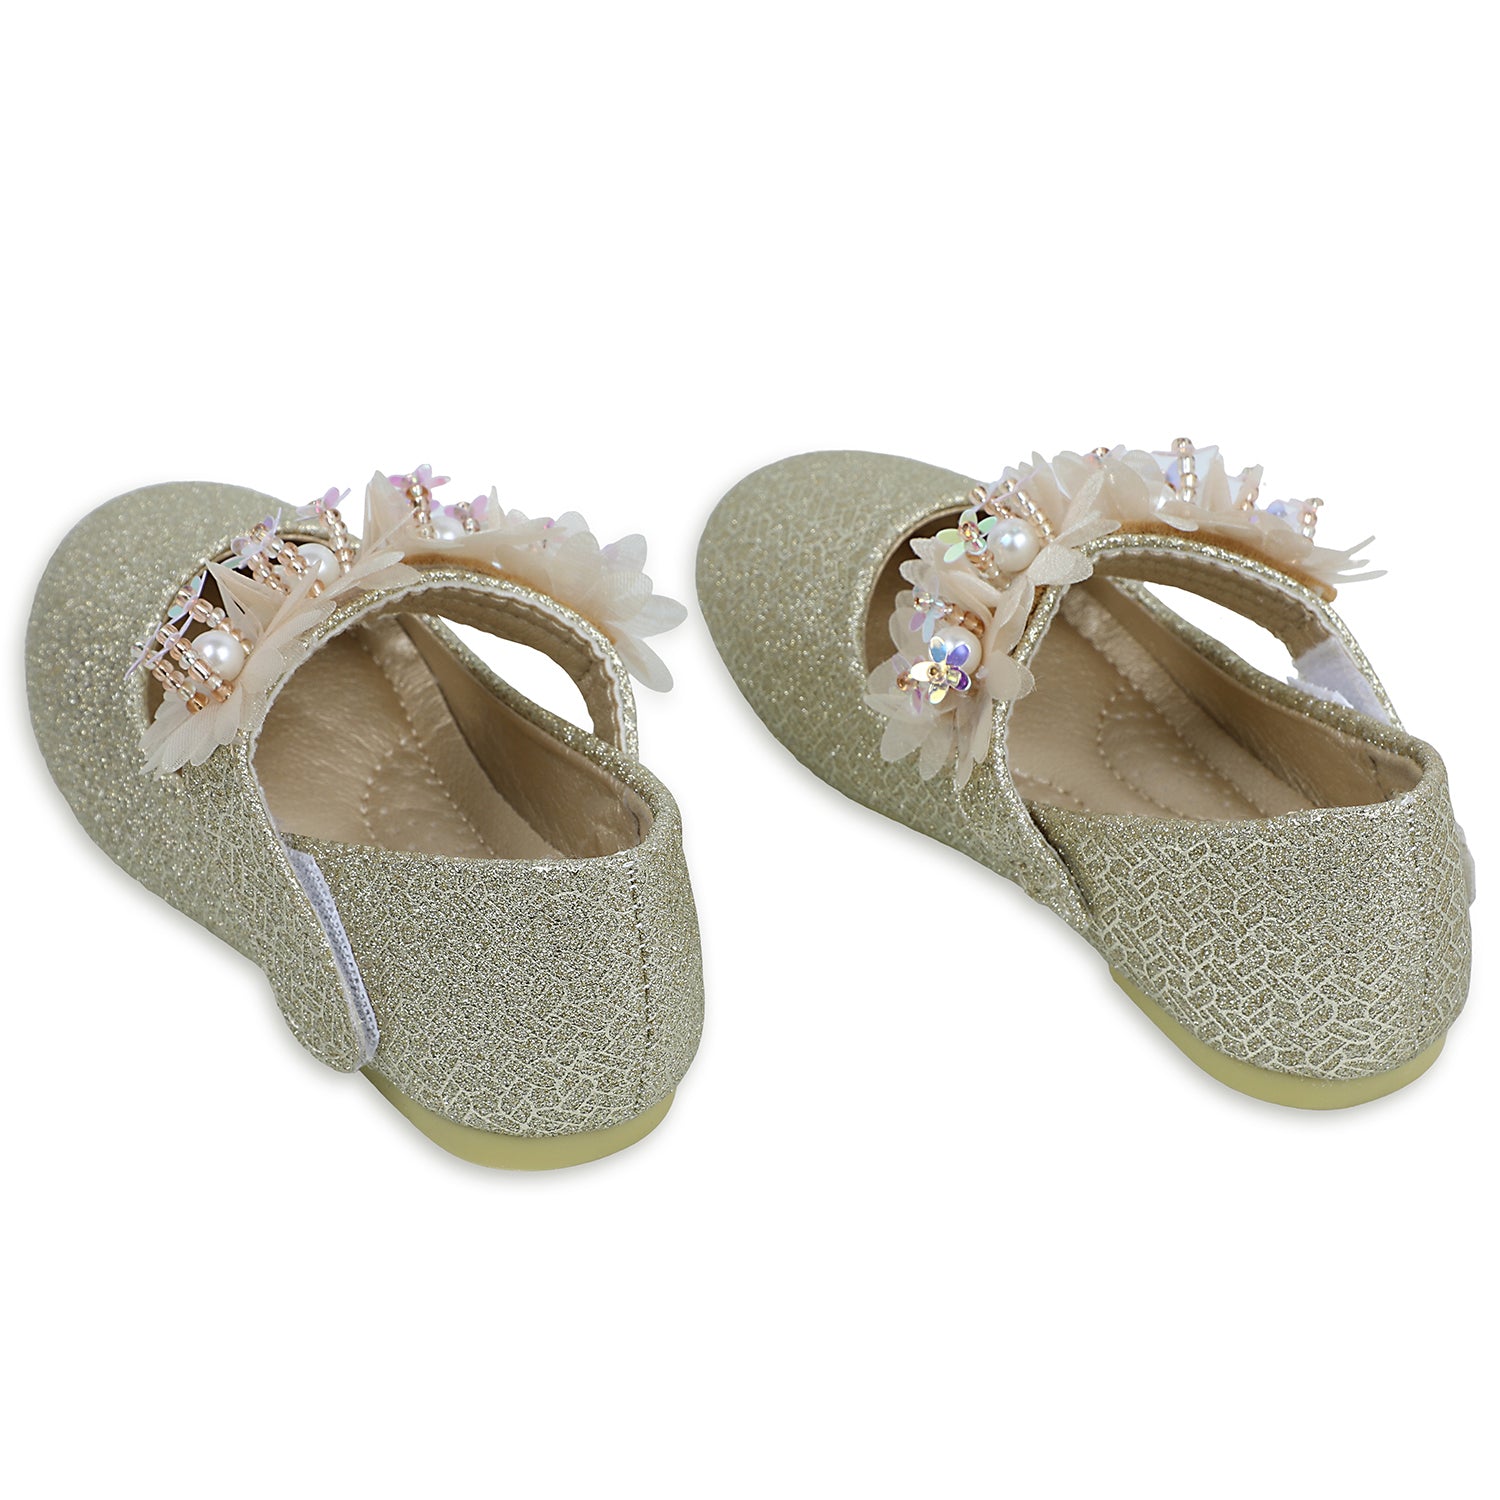 Baby Moo x Bash Kids Shiny Floral Applique Mary Jane Ballerinas - Gold